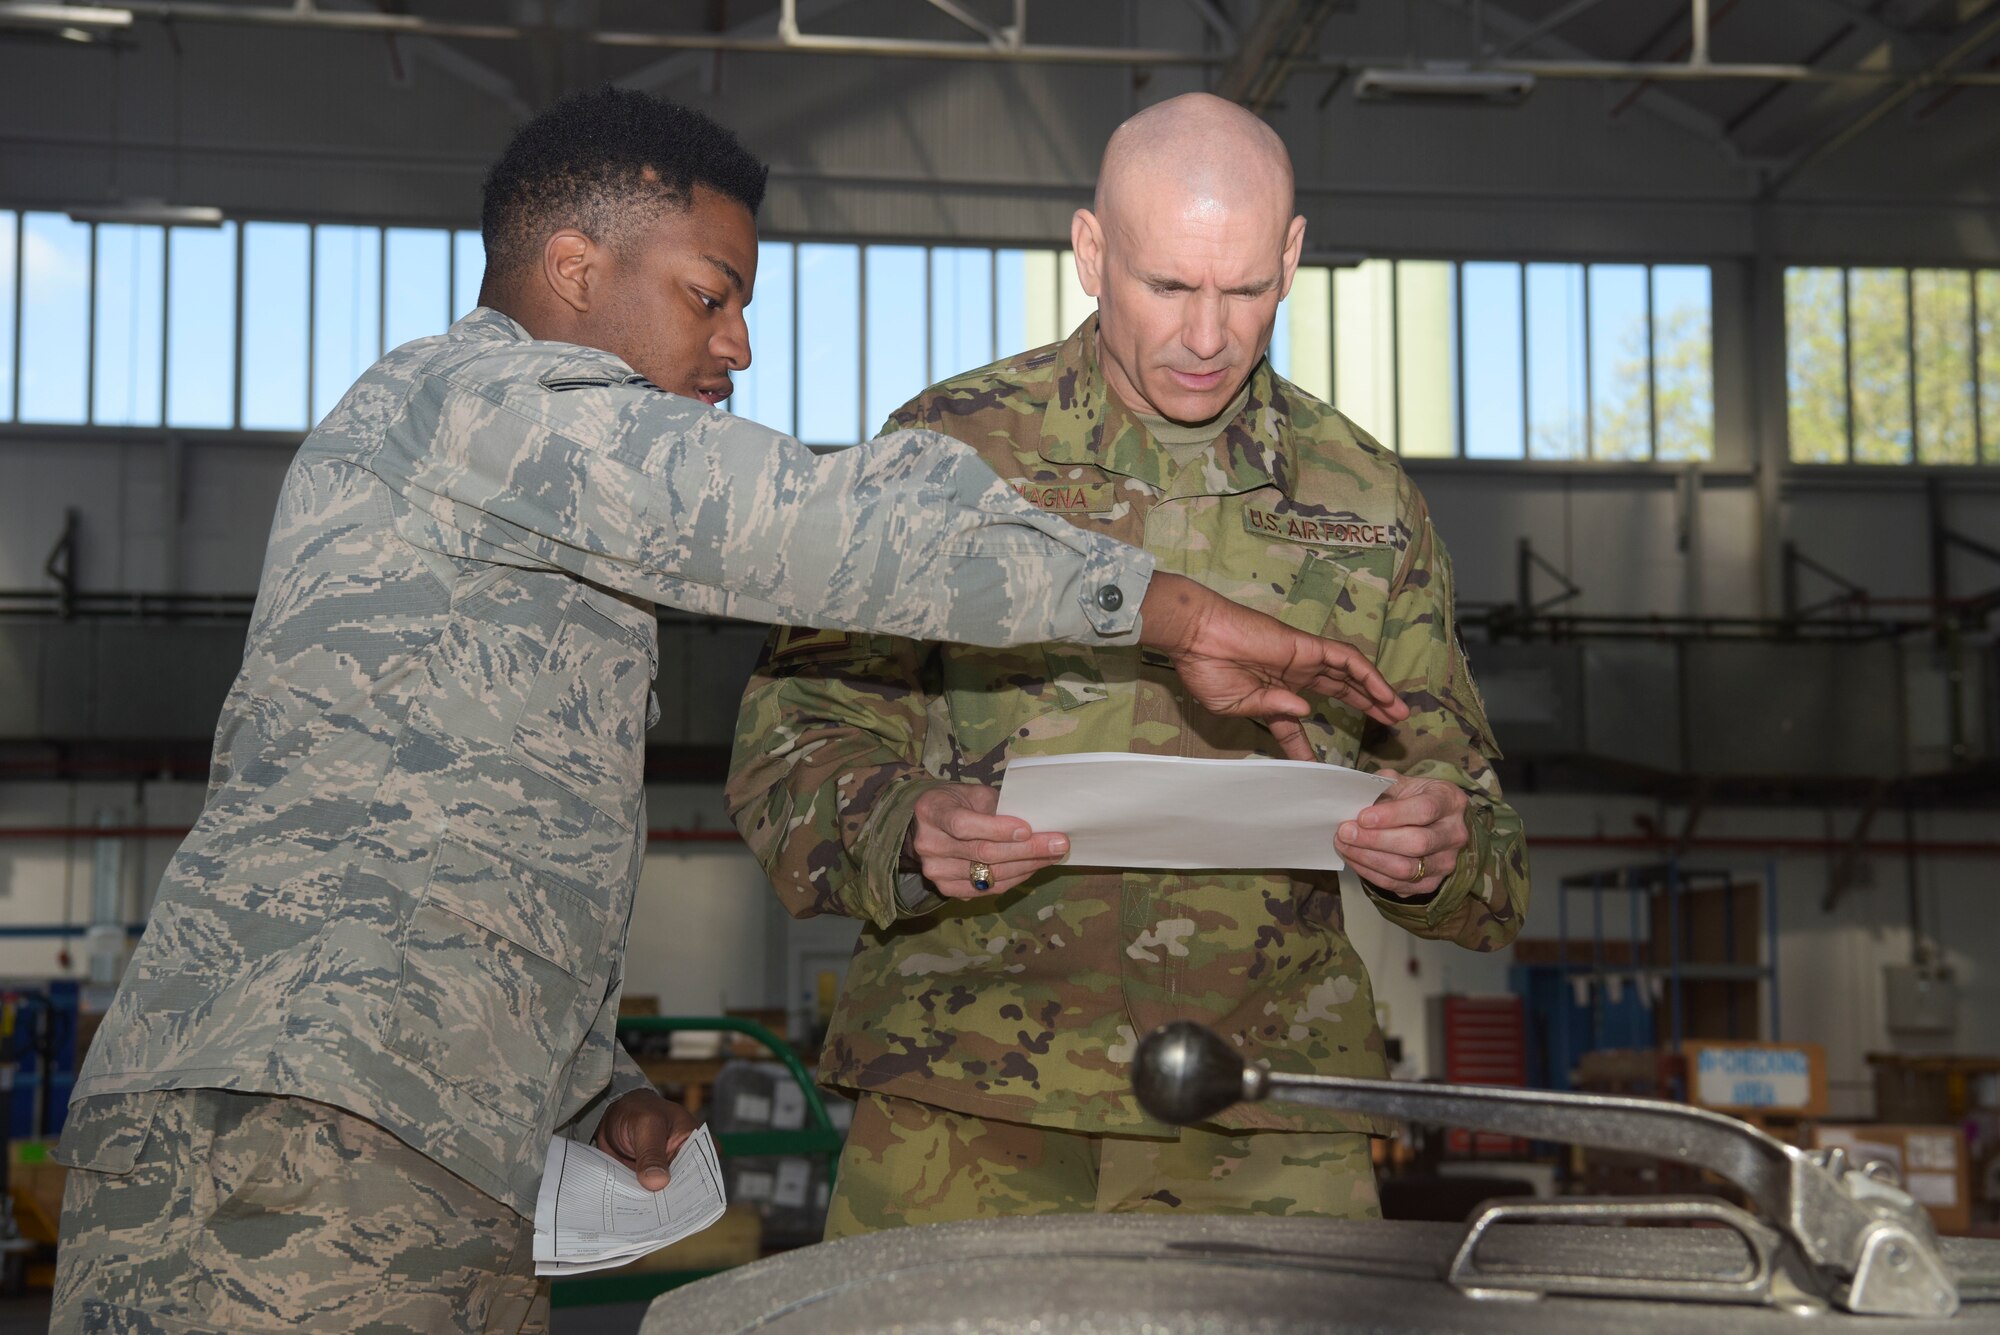 U.S. Air Force Senior Airman Kentral White, 100th Logistics Readiness Squadron traffic management journeyman, and Maj. Anthony LaMagna, 100th Logistics Readiness Squadron commander, look over shipping orders for an outbound package at RAF Mildenhall, England, May 2, 2019. LaMagna participates in ‘Walking with Warriors’ once a week, where all leadership leave their desk and interact with Airmen, from top leadership on down.   (U.S. Air Force photo by Senior Airman Alexandria Lee)